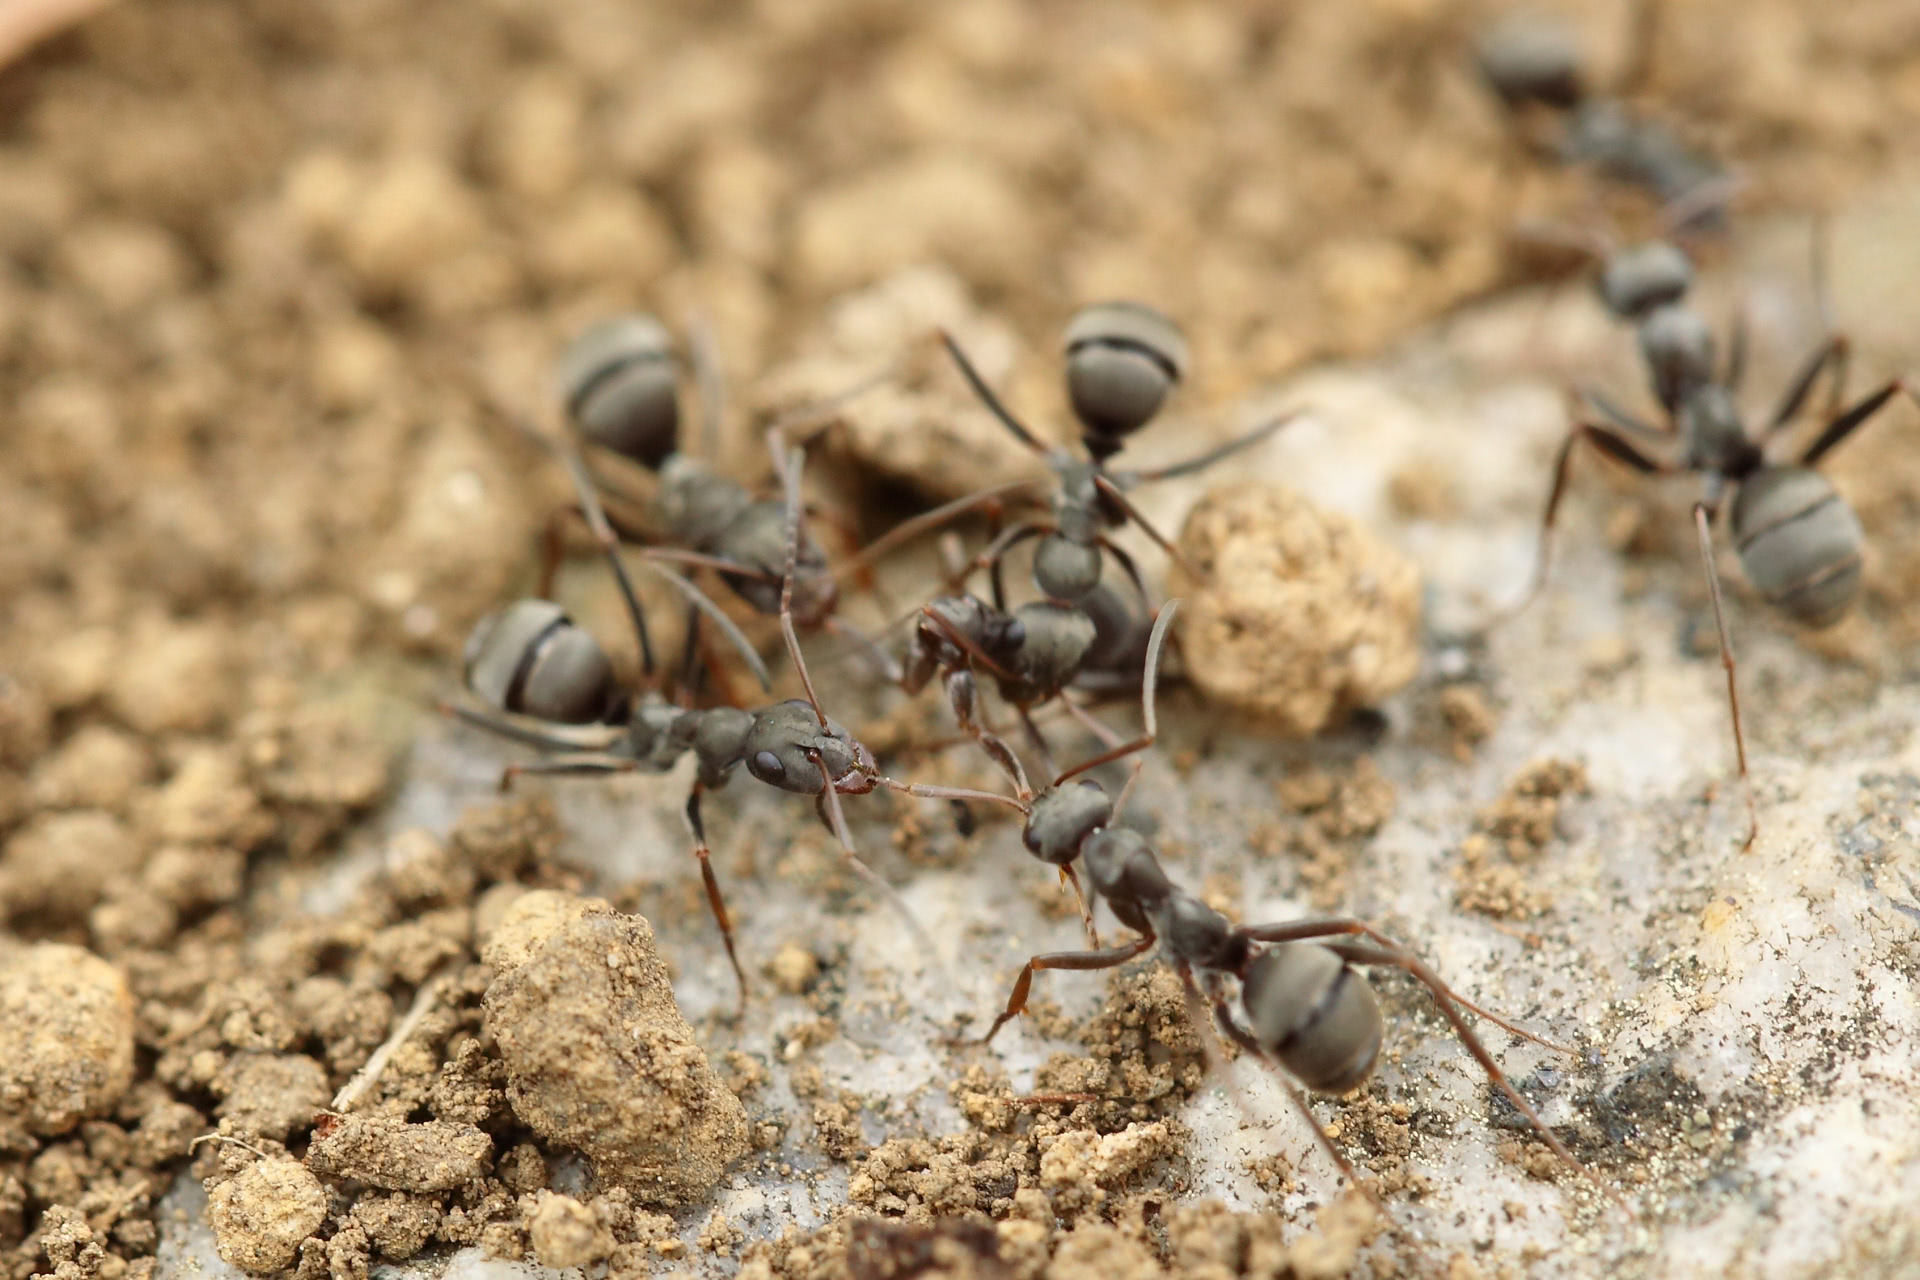 Pictures of ants on the dirt.